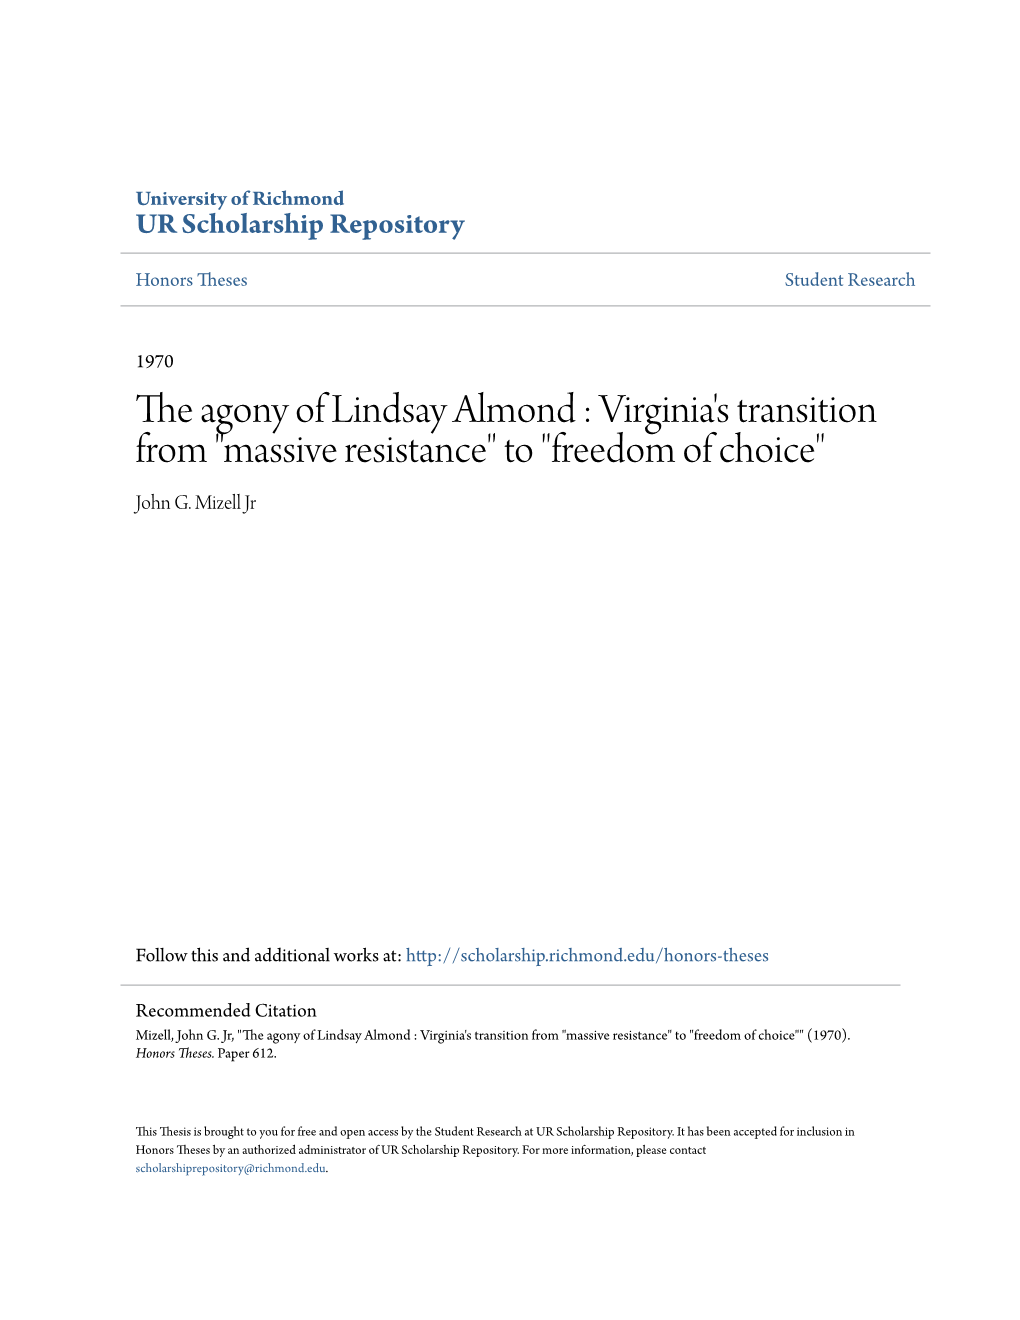 The Agony of Lindsay Almond : Virginia's Transition from "Massive